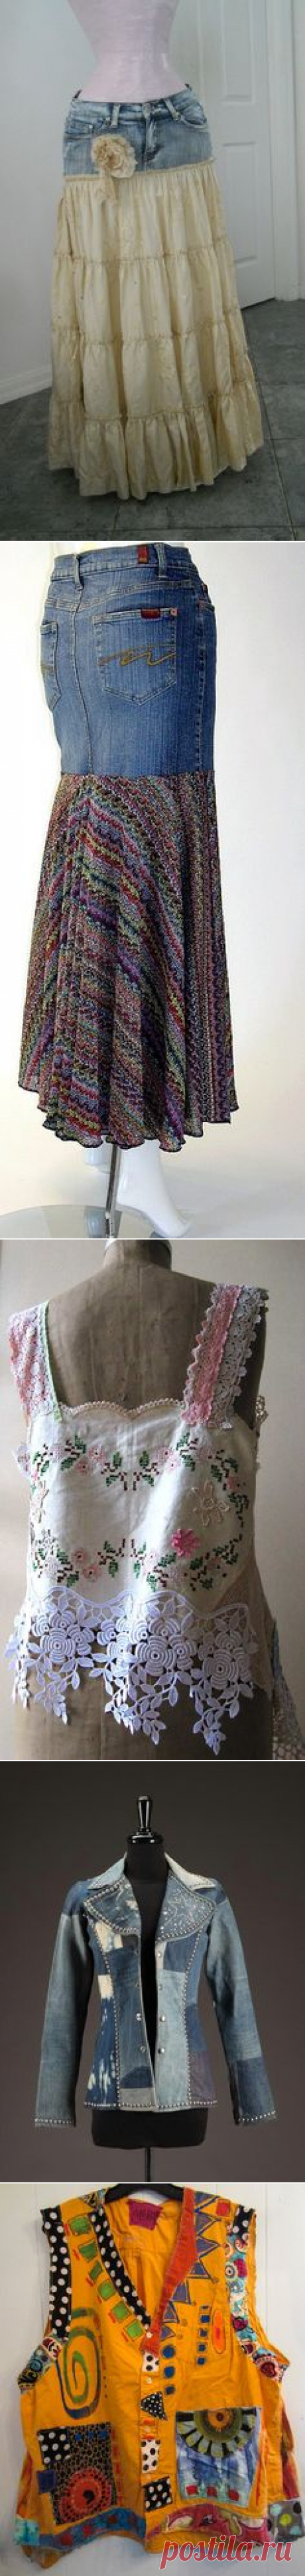 Time traveller-- colorful crazy bohemian denim jacket, textile art jacket with antique lace and hand embroideries